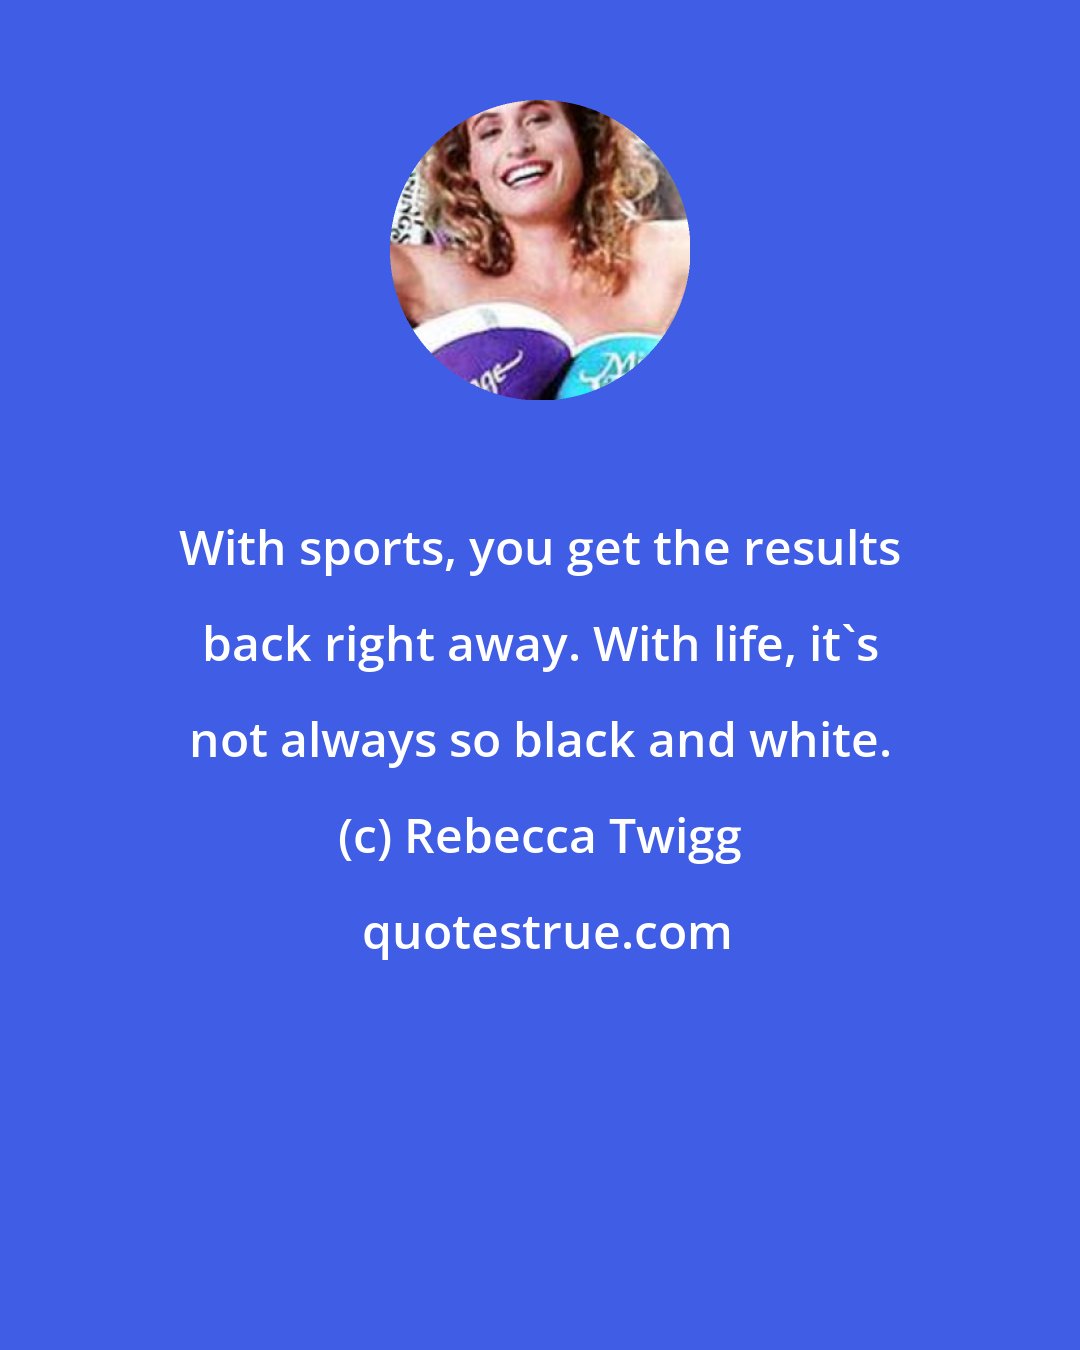 Rebecca Twigg: With sports, you get the results back right away. With life, it's not always so black and white.